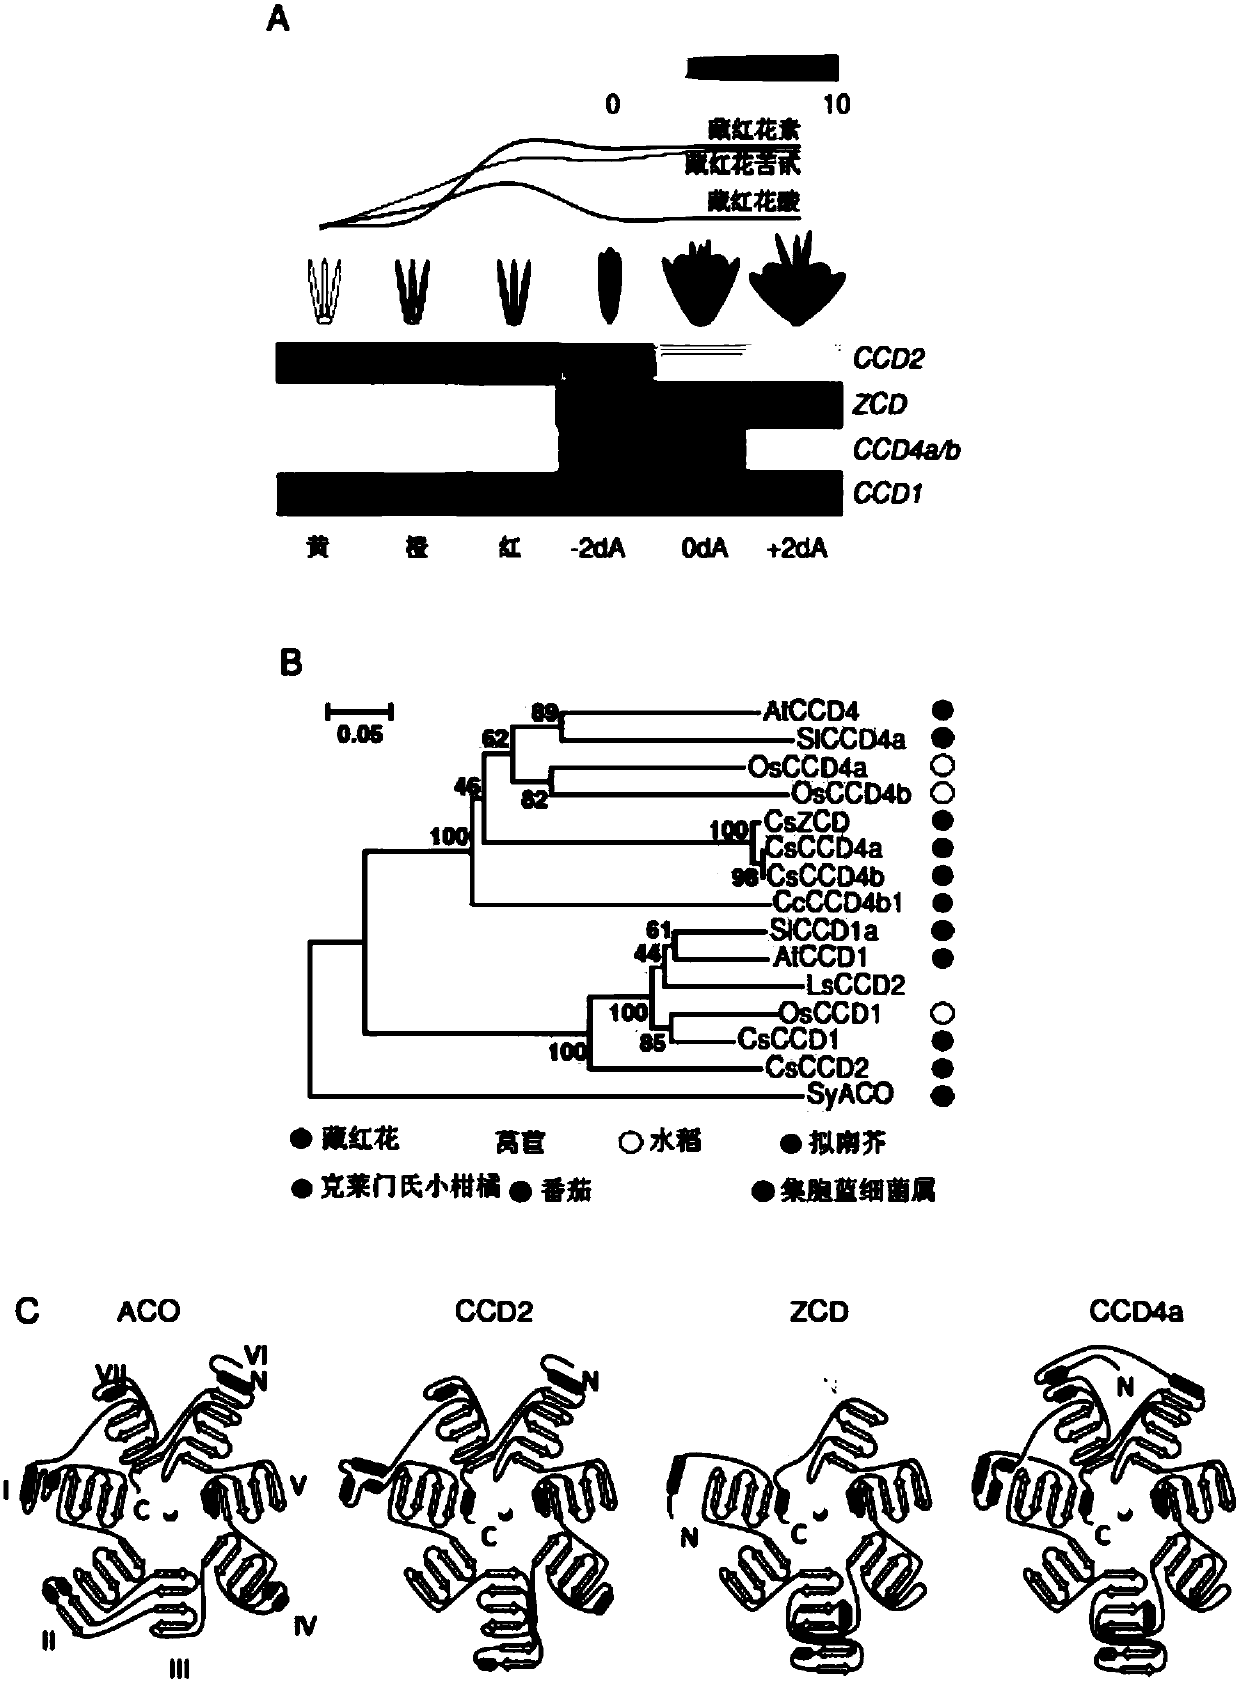 A carotenoid dioxygenase and methods for the biotechnological production in microorganisms and plants of compounds derived from saffron